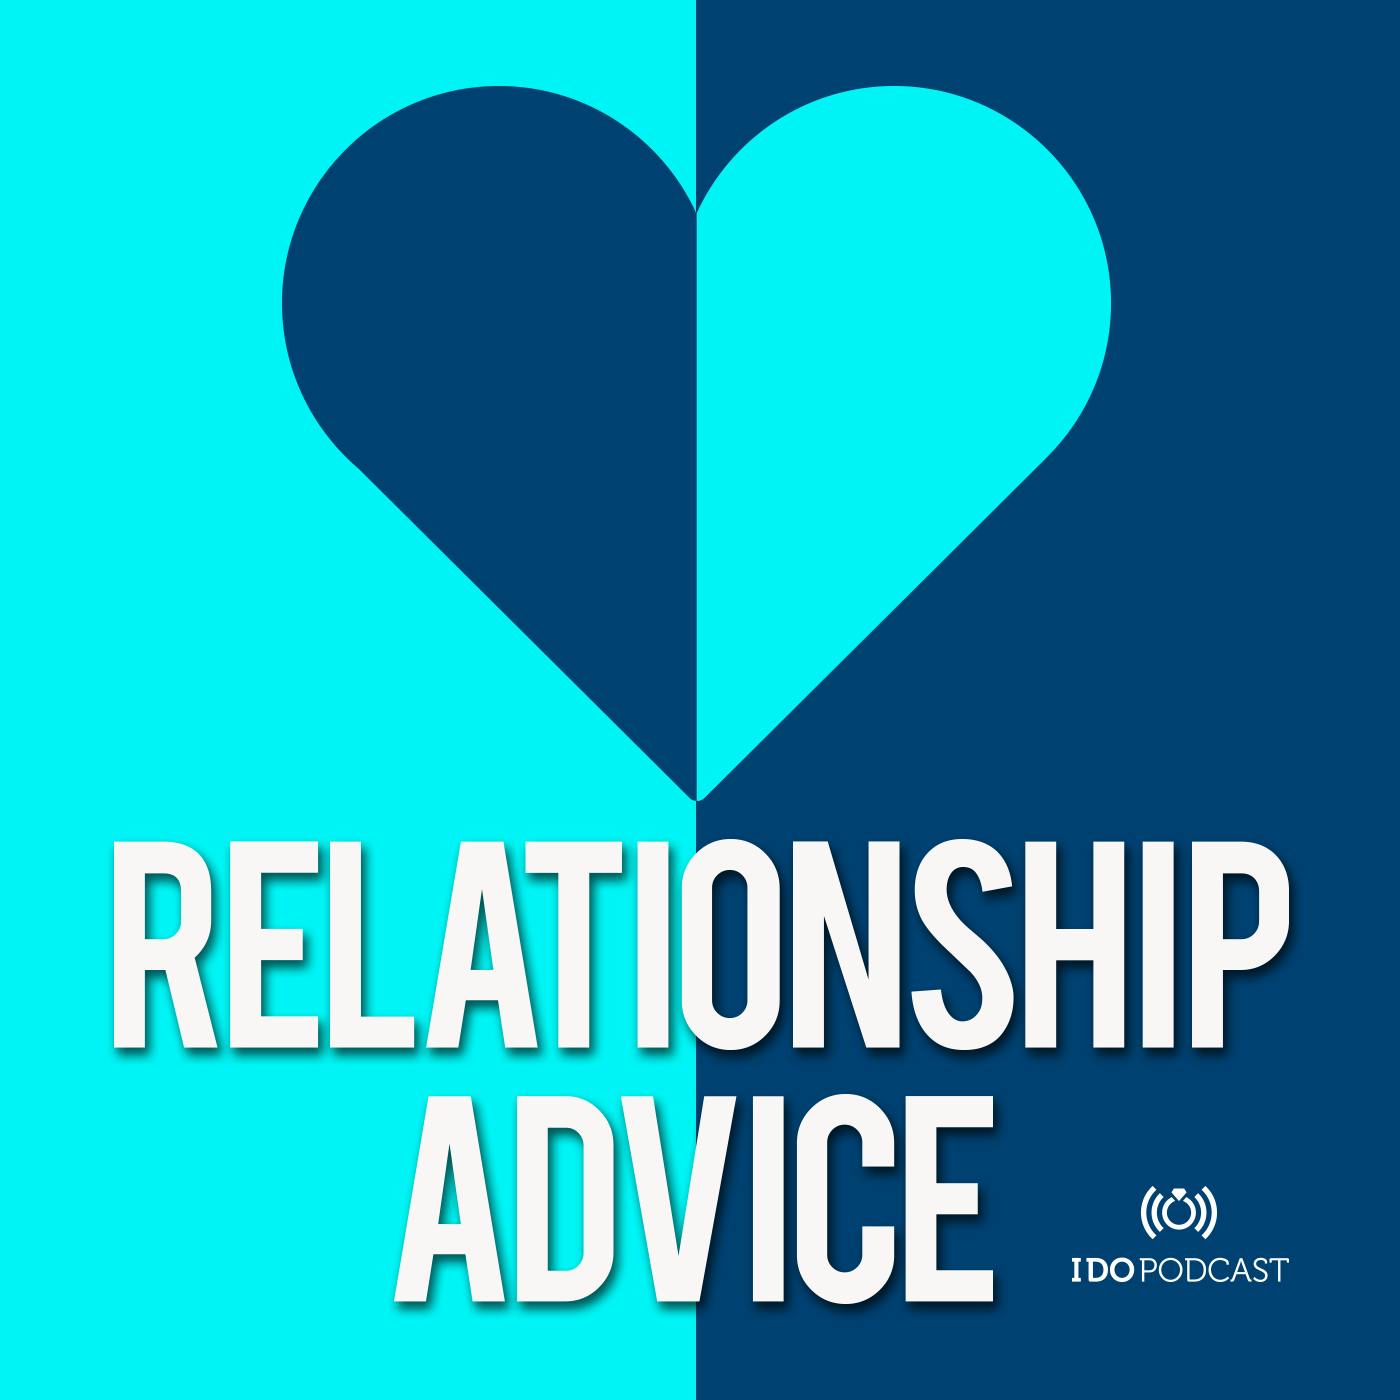 258: Understanding Our Emotions For Better Relationships